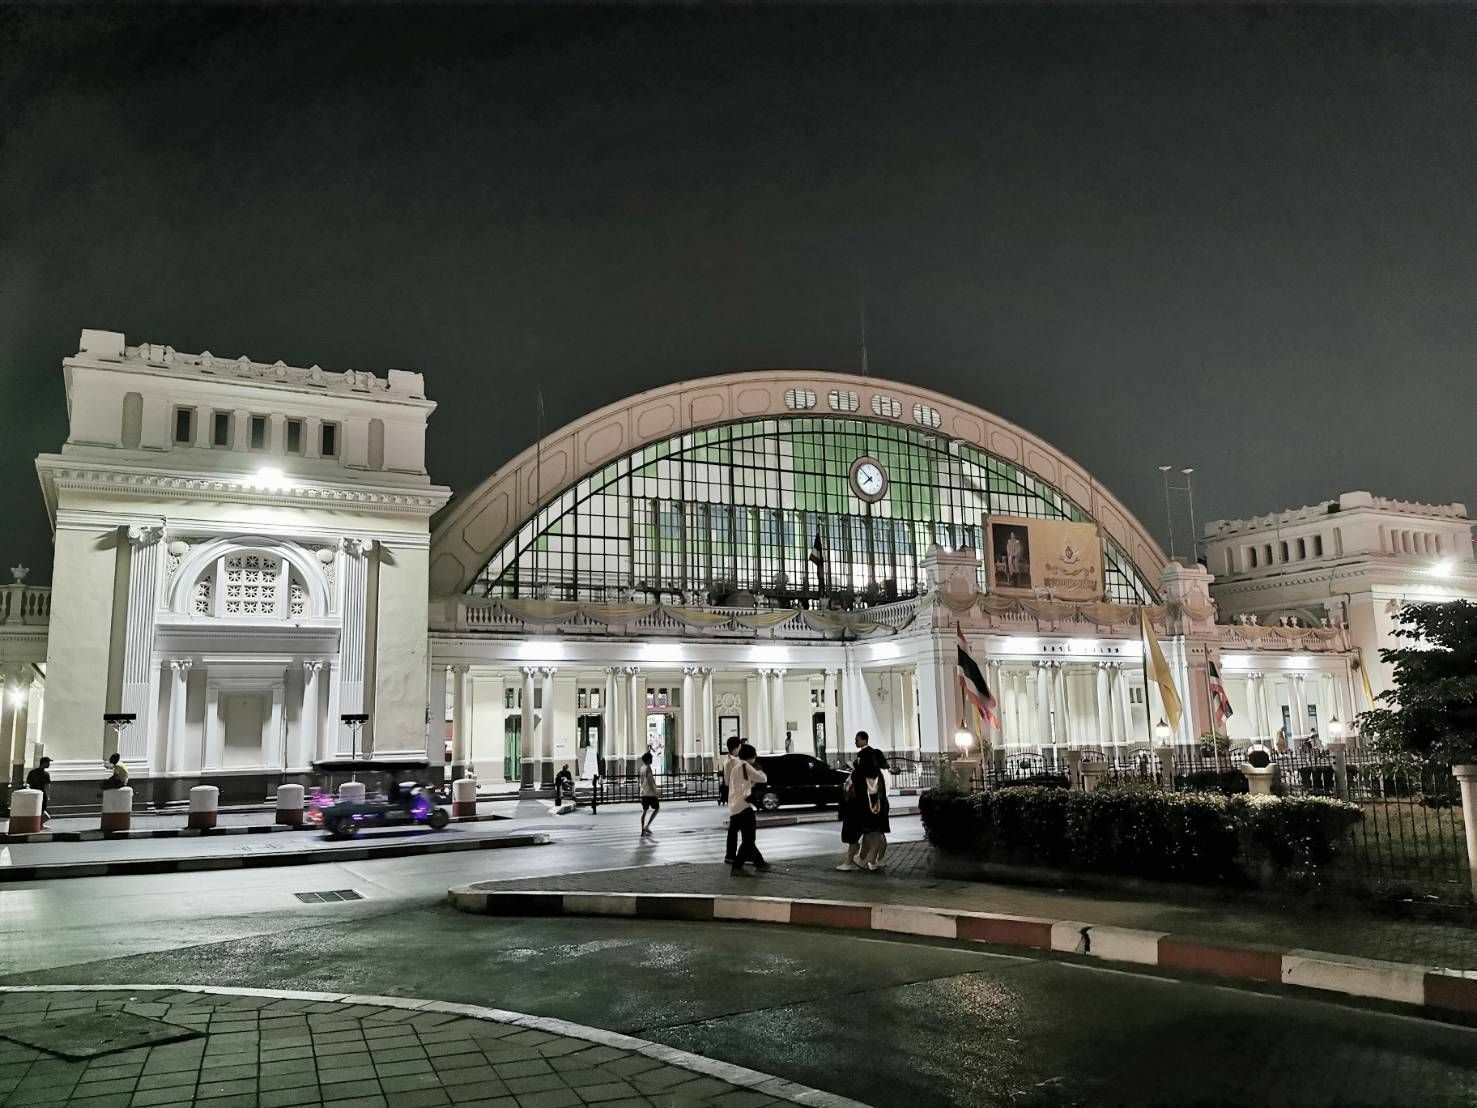 southeast-asia-s-biggest-railway-station-opens-to-passengers-north